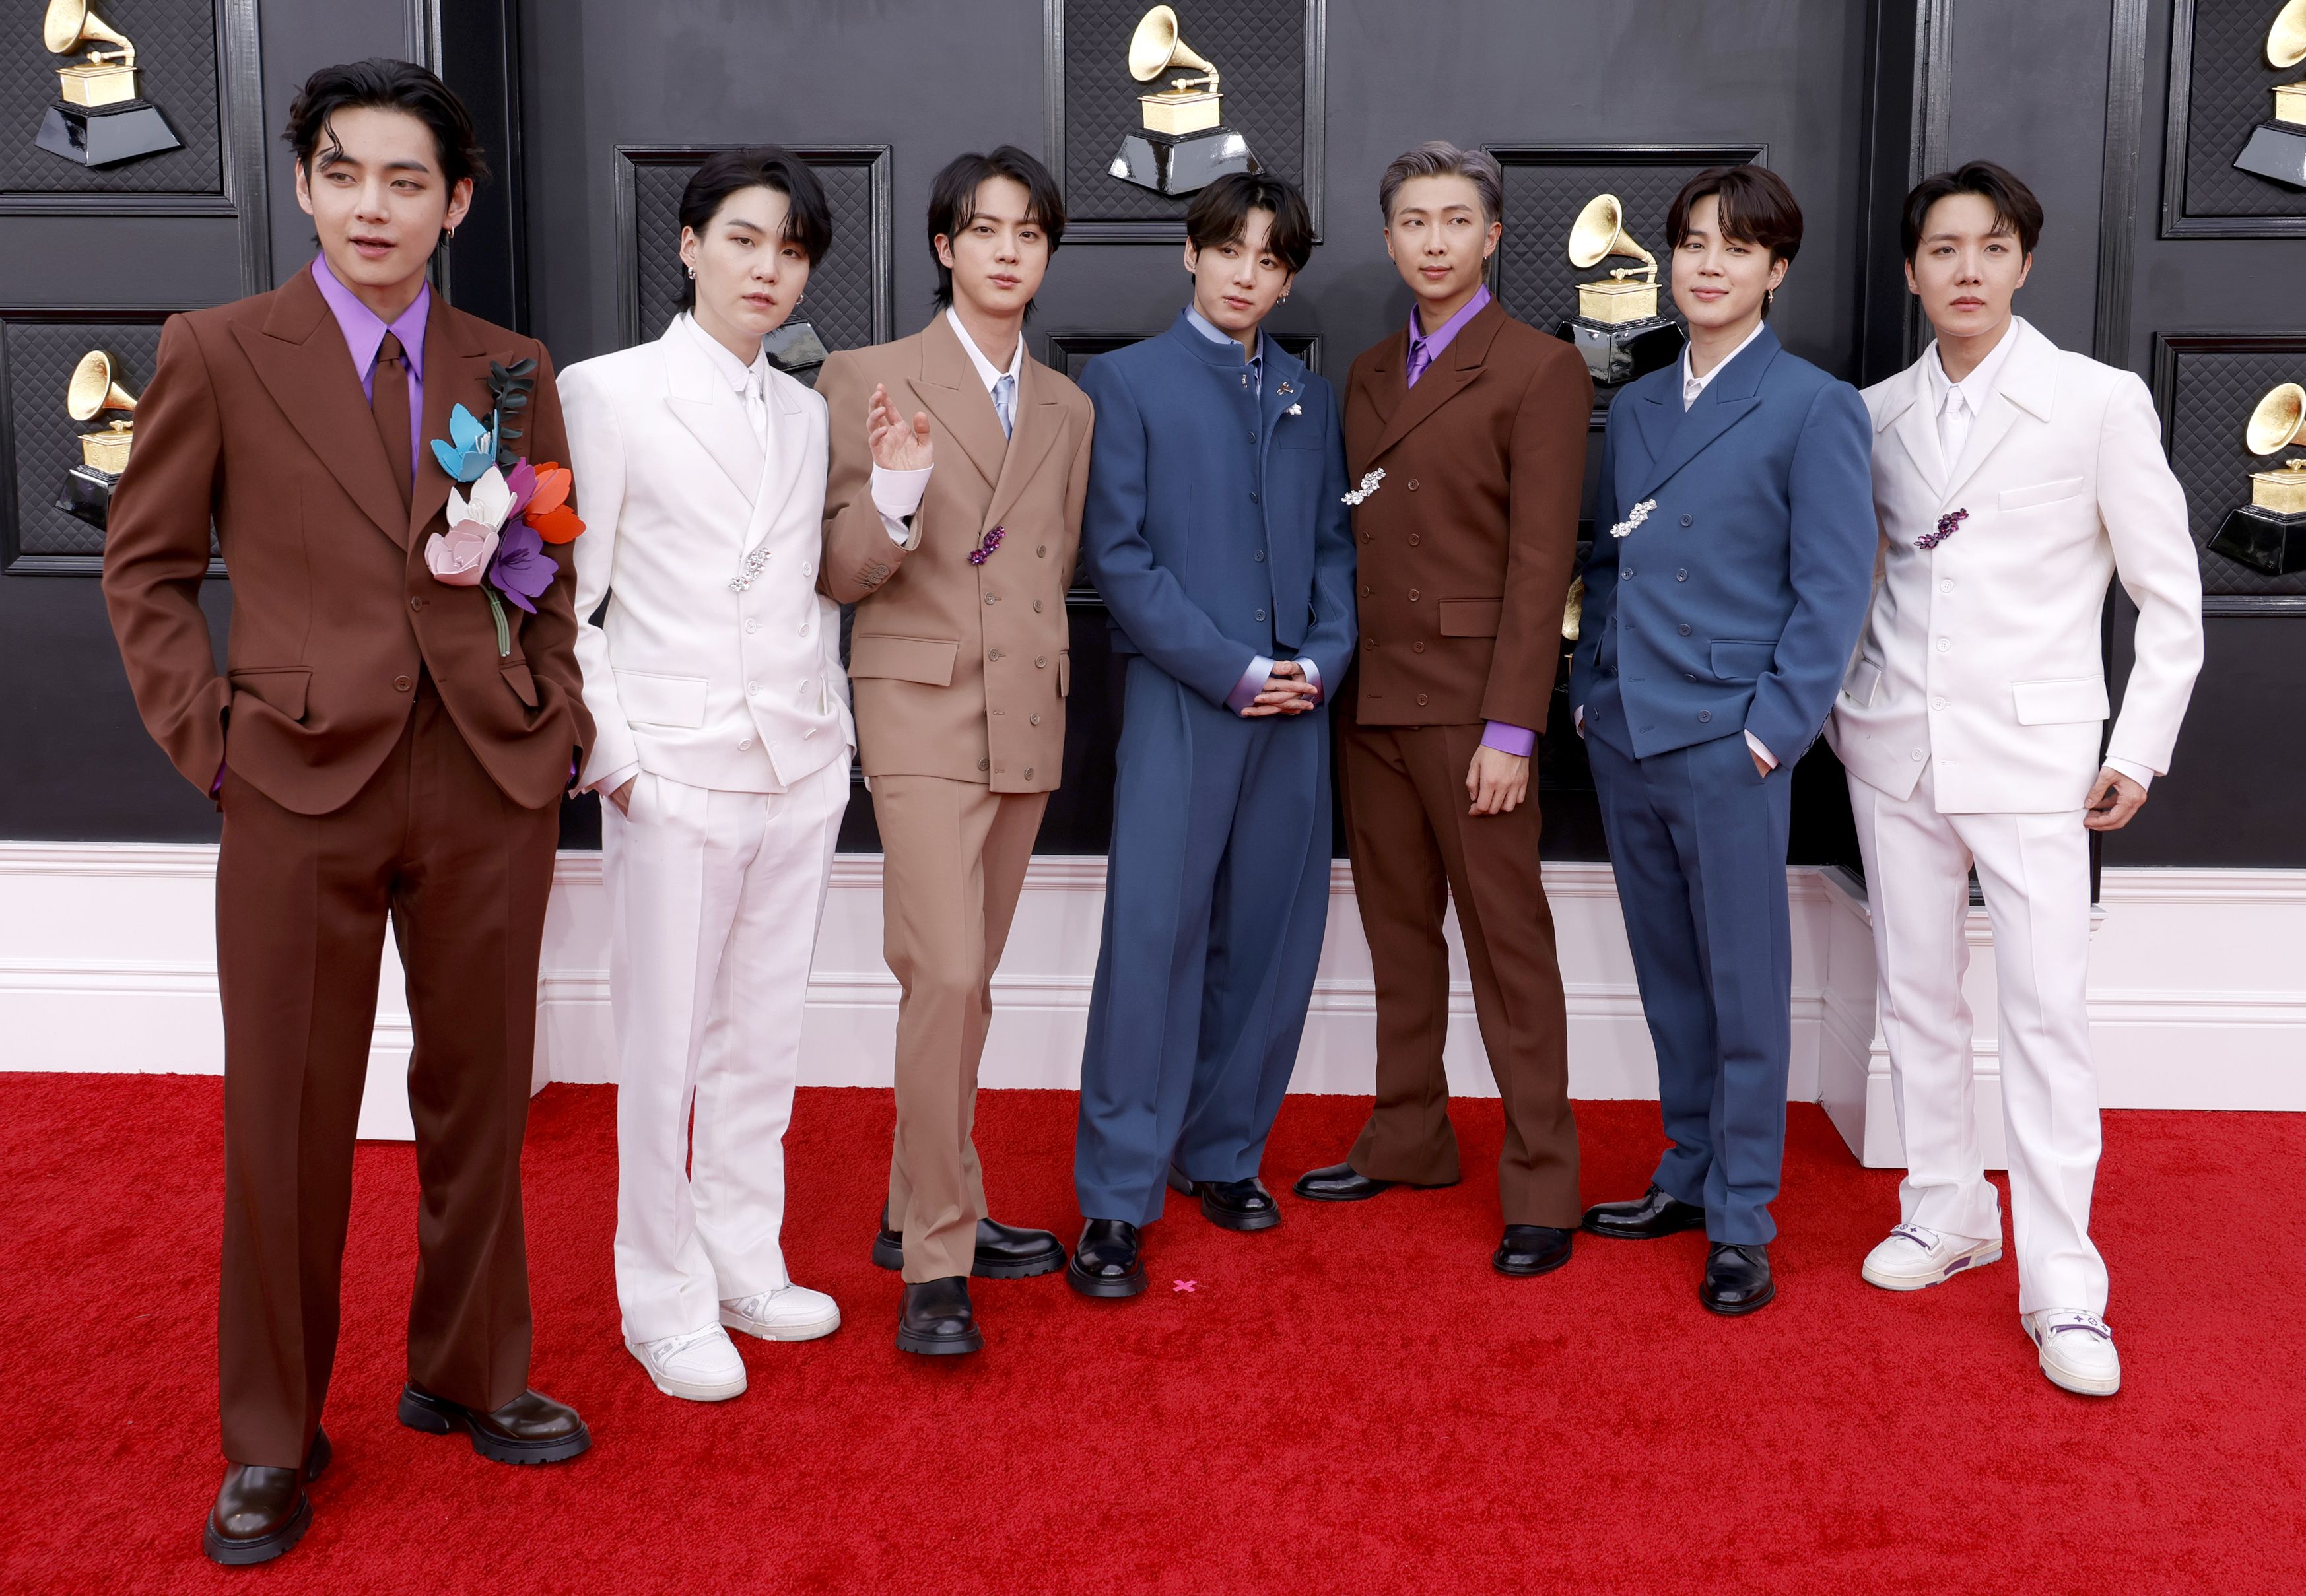 BTS scripts history with three Grammy Awards nominations